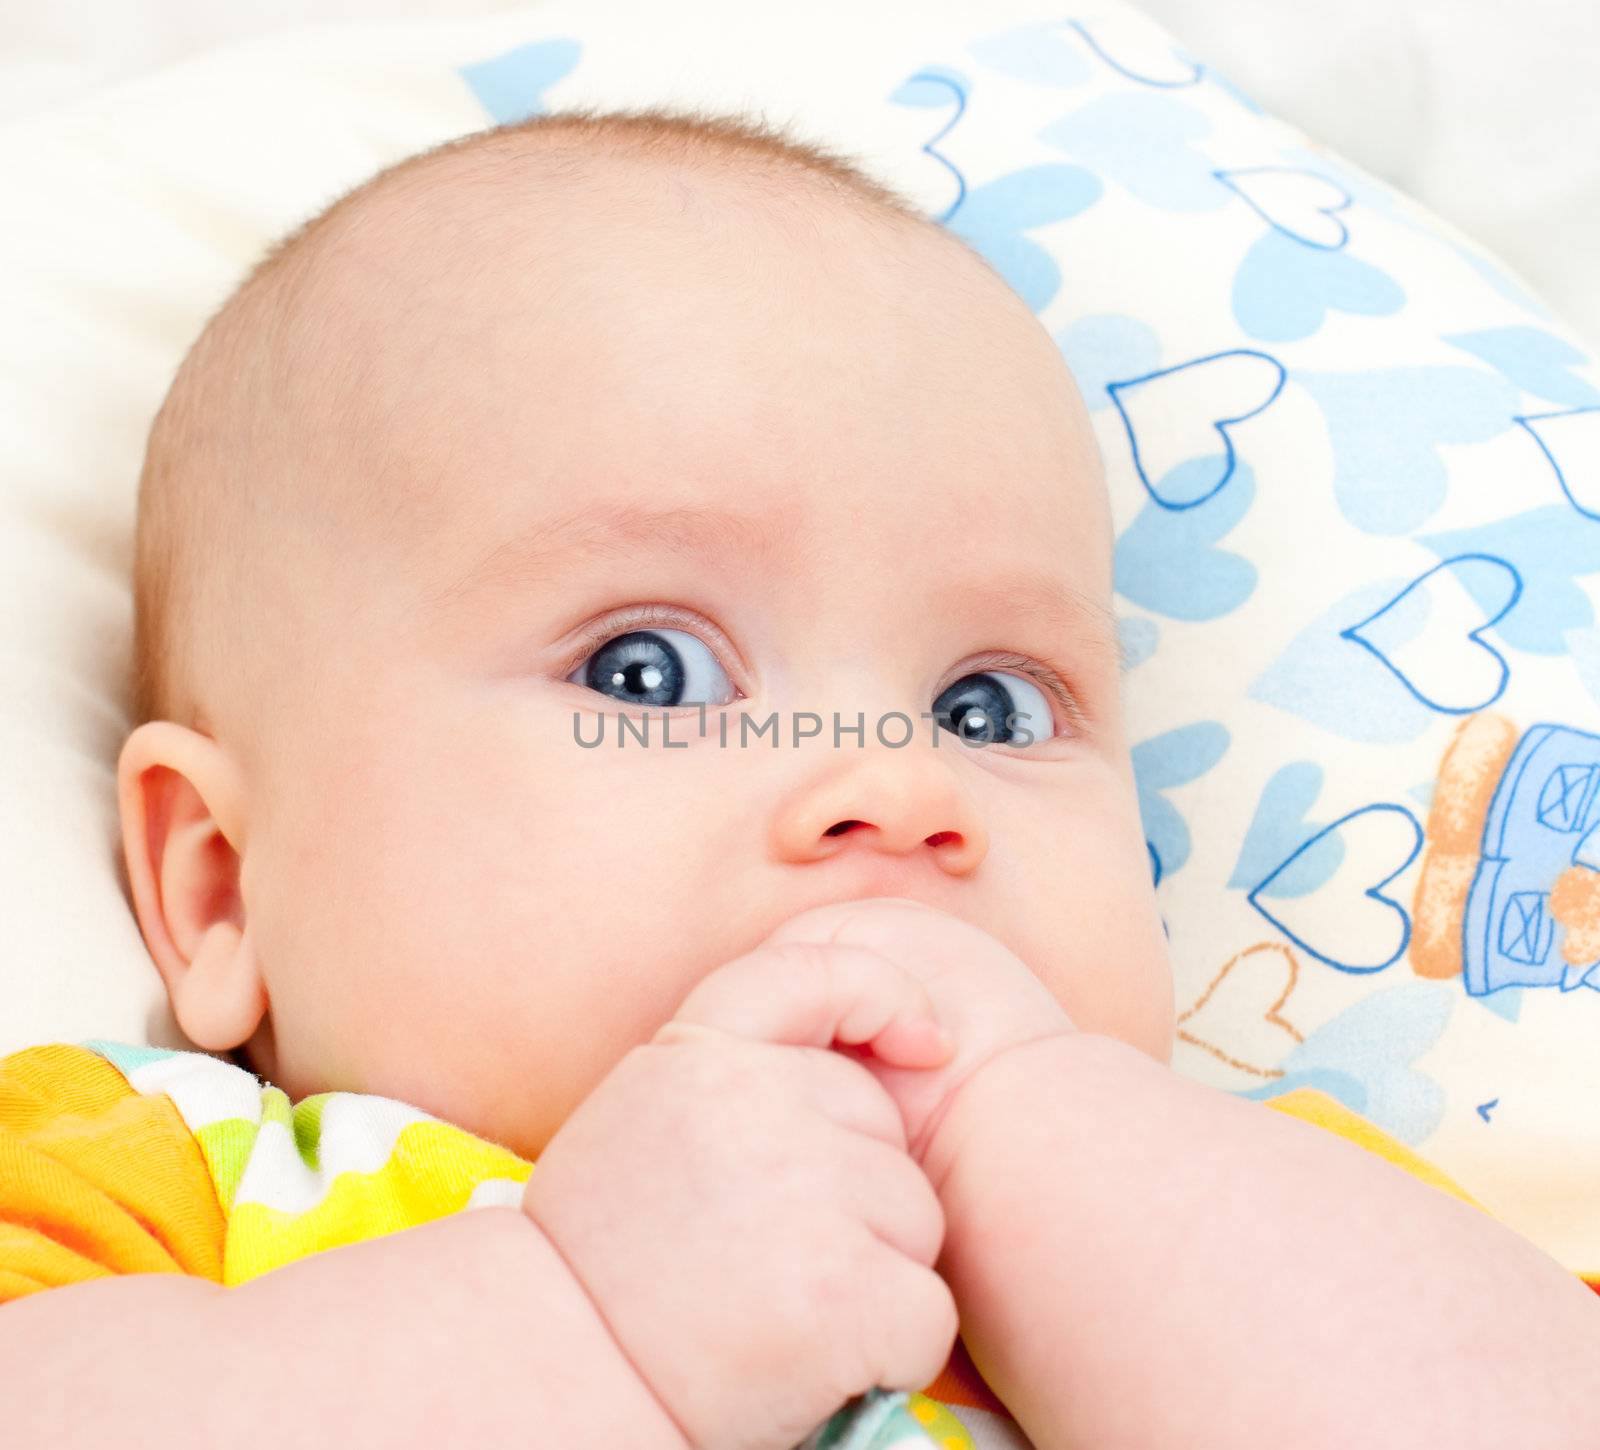 Infant with hands in mouth by naumoid